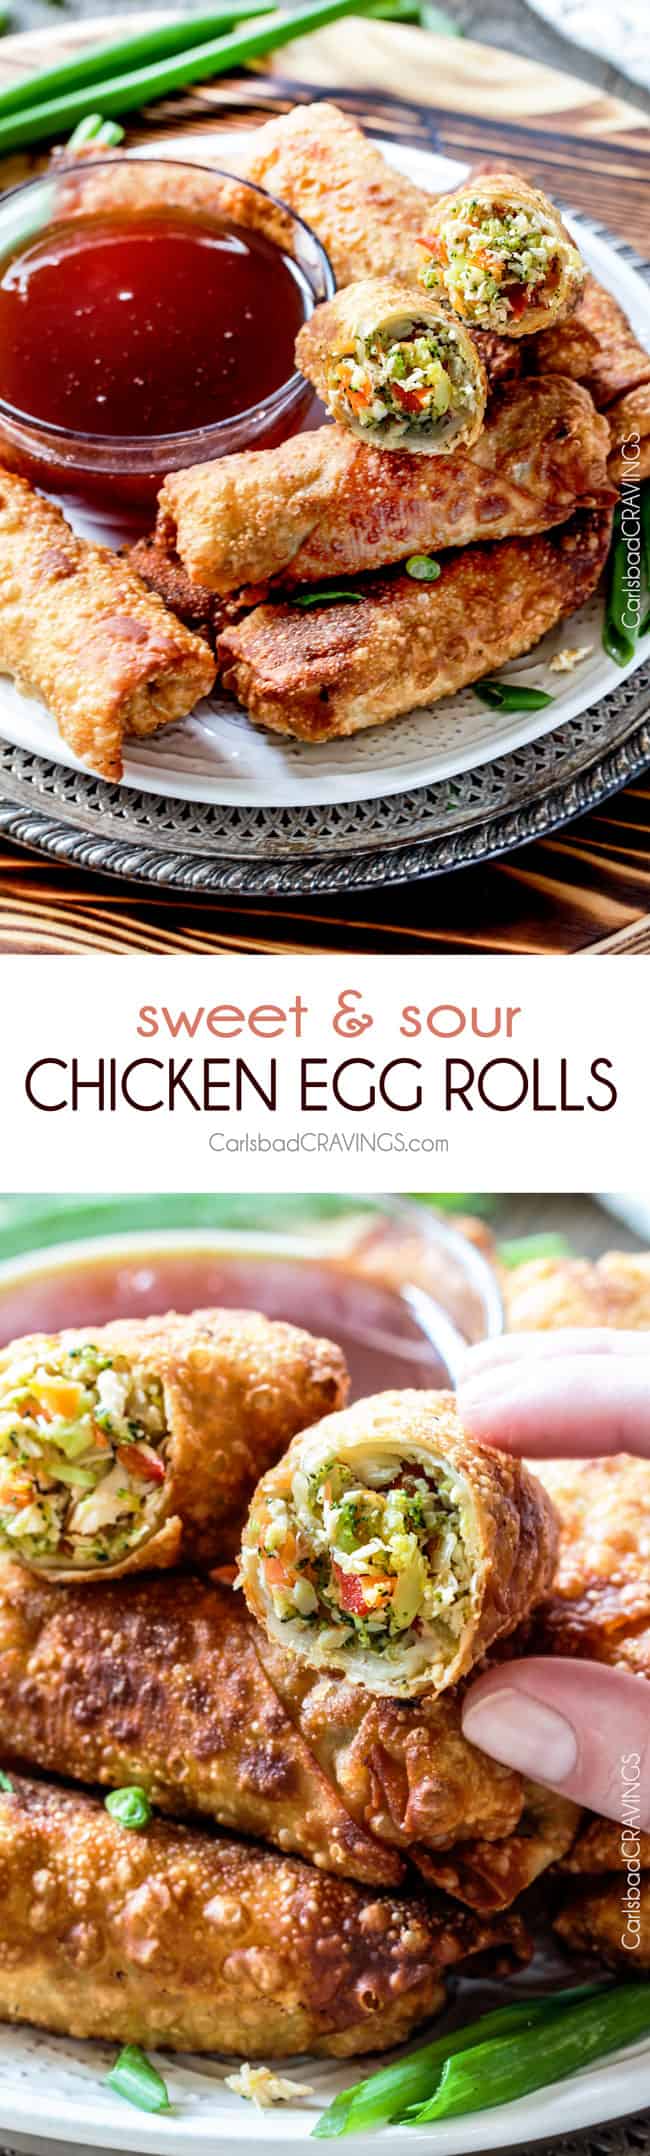 Sweet and Sour Chicken Egg are the best egg rolls I’ve ever had with the best sweet and sour sauce! And made extra fast with the food processor. I am bringing these to all my holiday parties! #appetizer #NewYears #Christmas